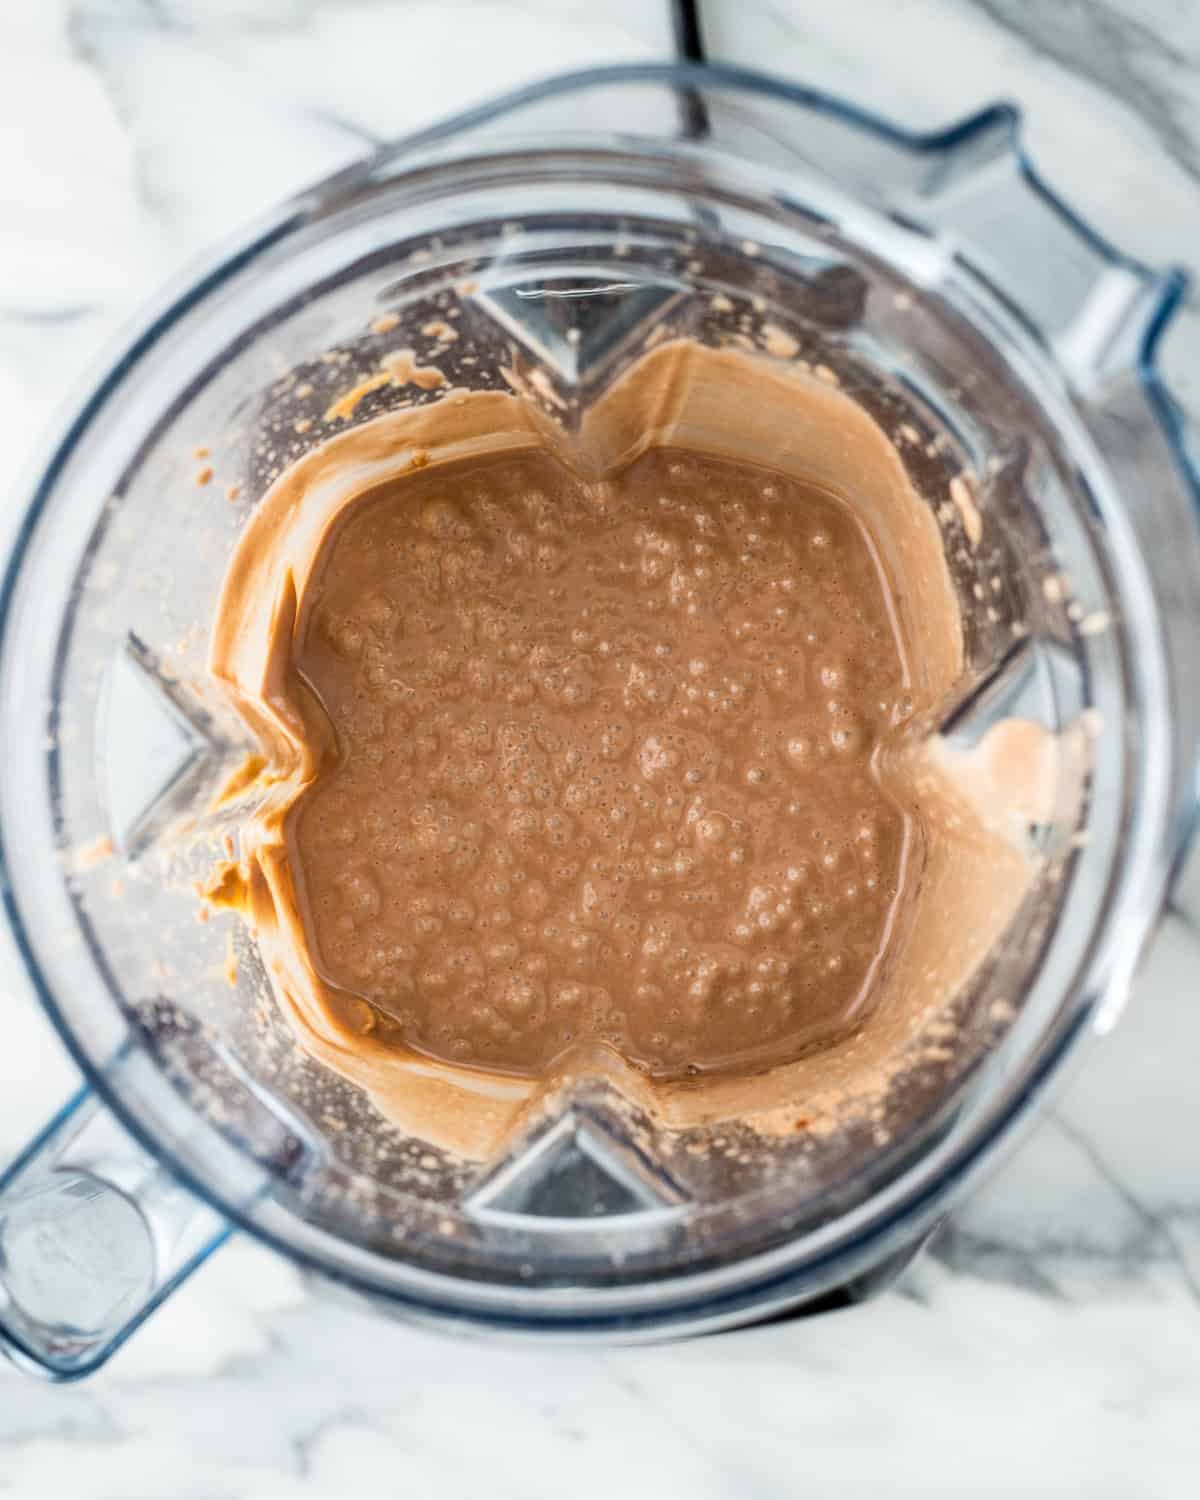 Dairy Free Chocolate Peanut Butter Ice Cream base blended in a blending container